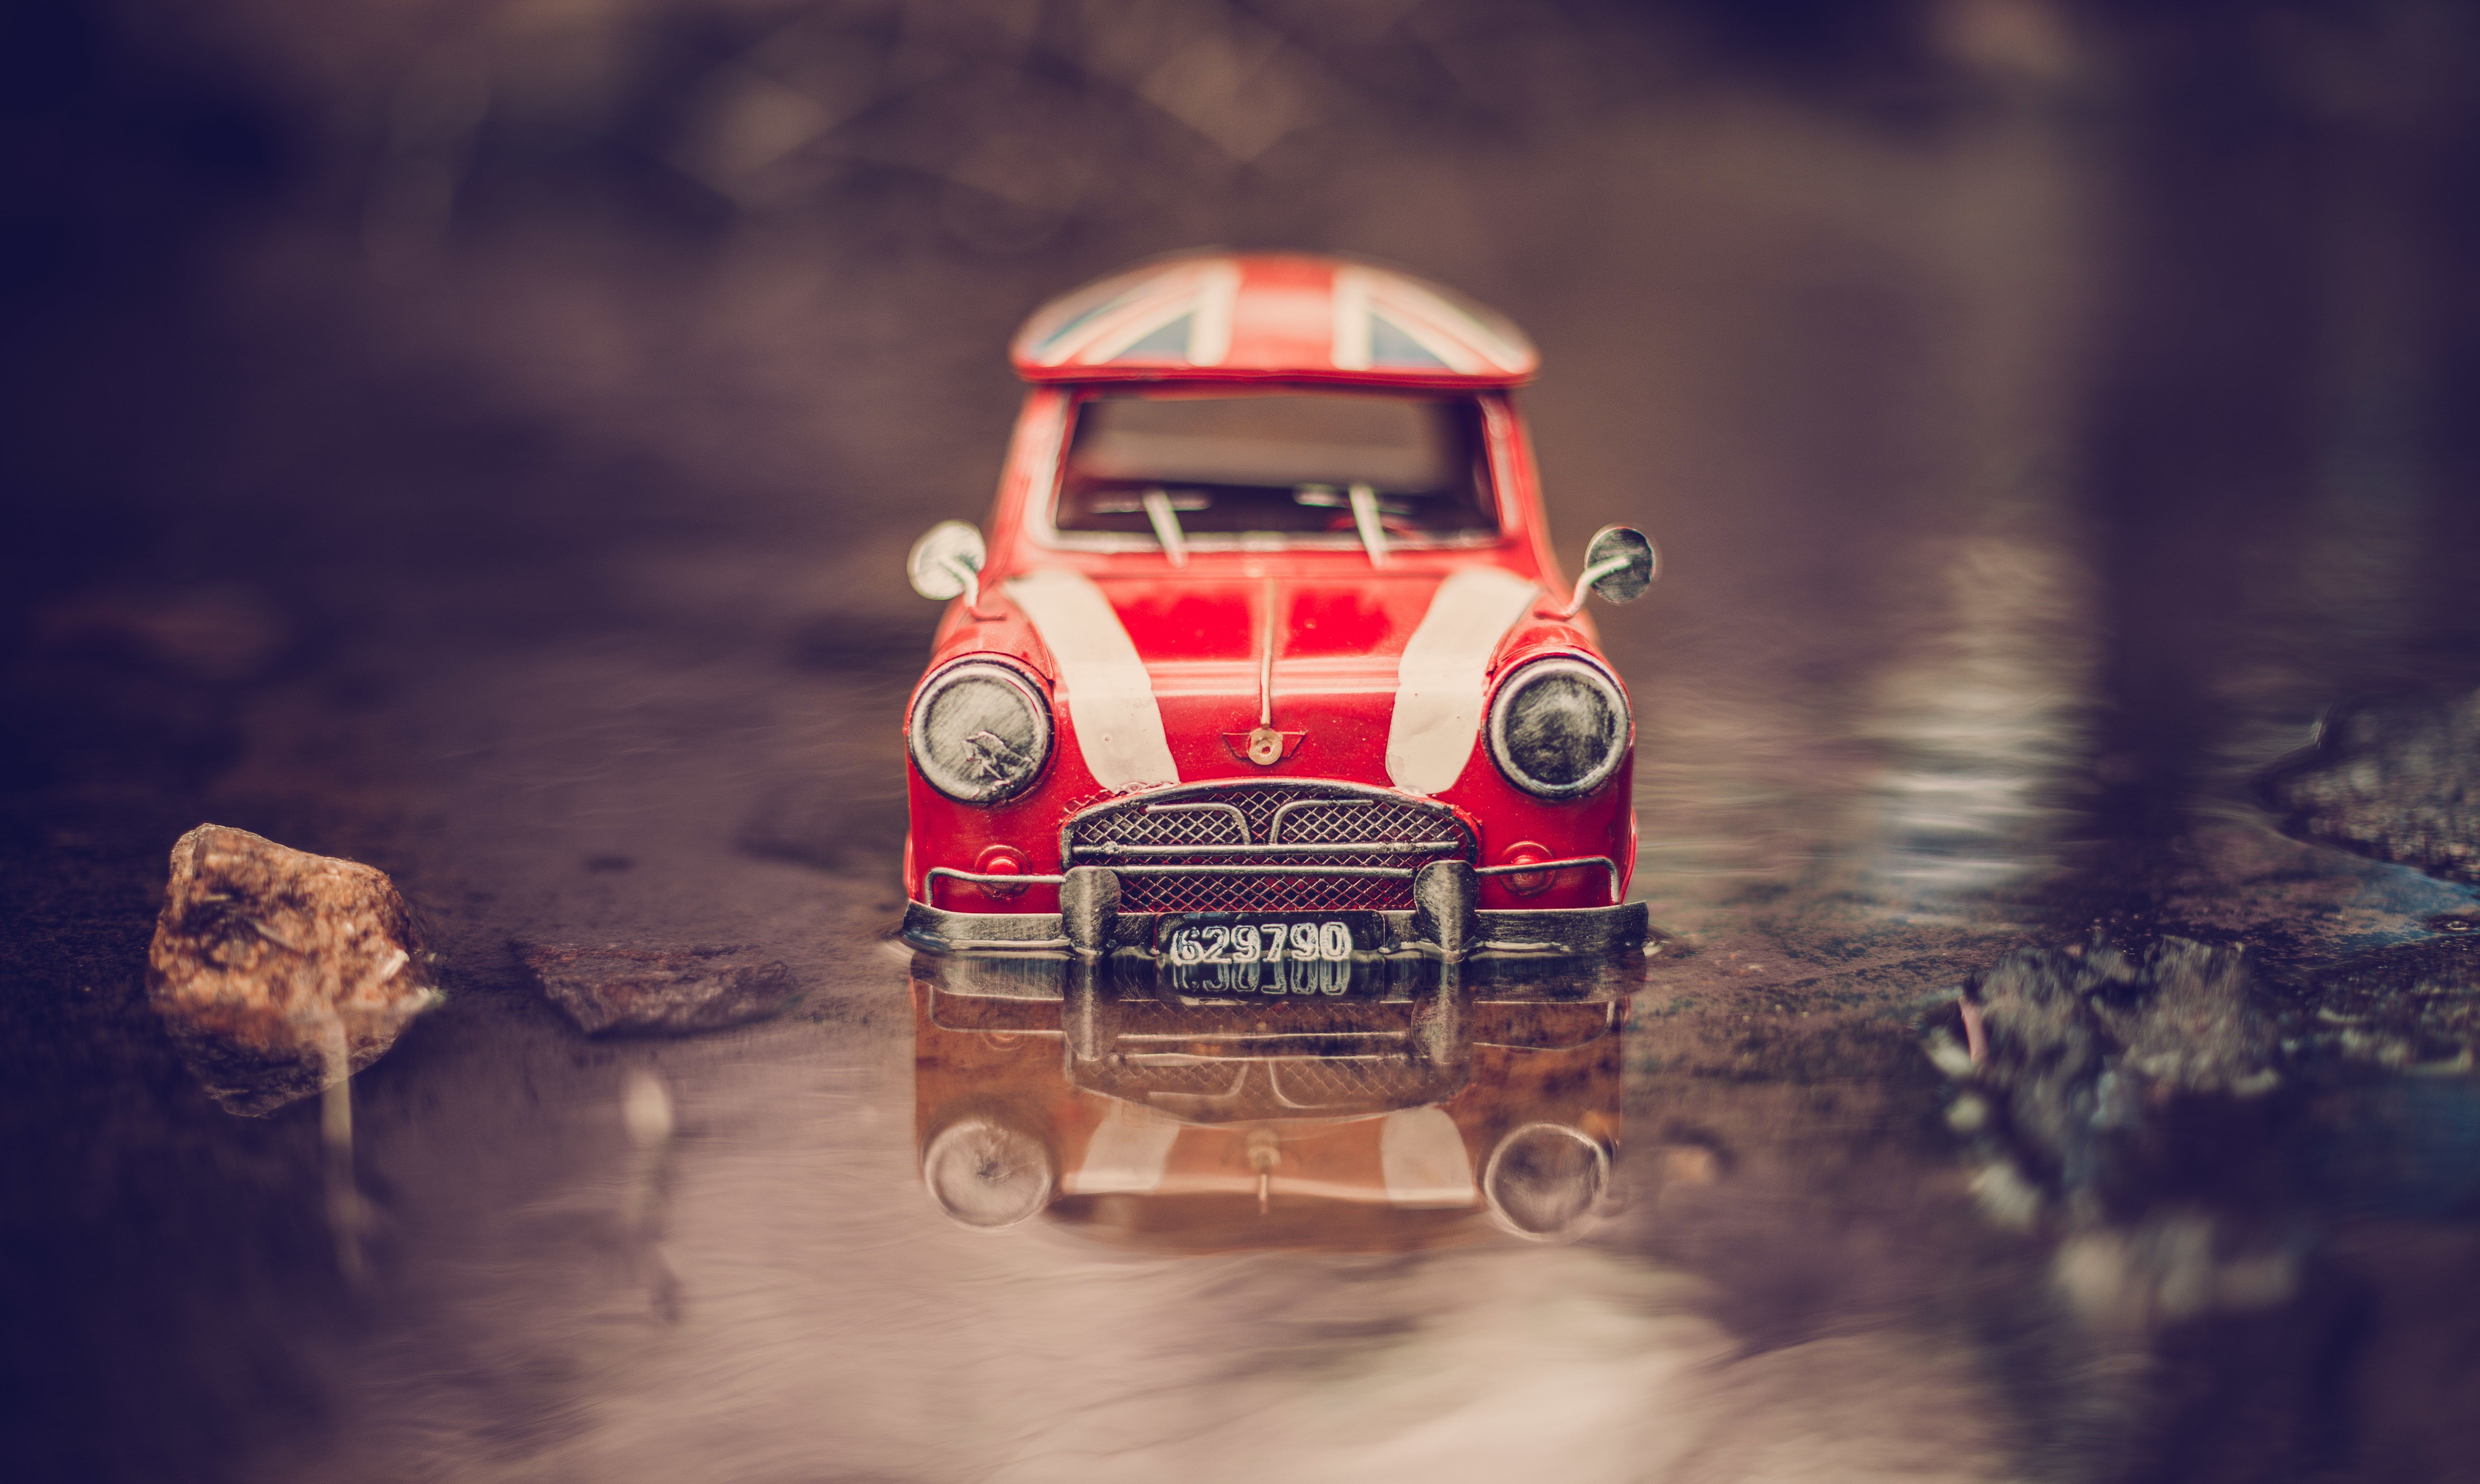 Miniatures Toys Mini Cooper Car Wallpapers Hd Desktop And Mobile Backgrounds